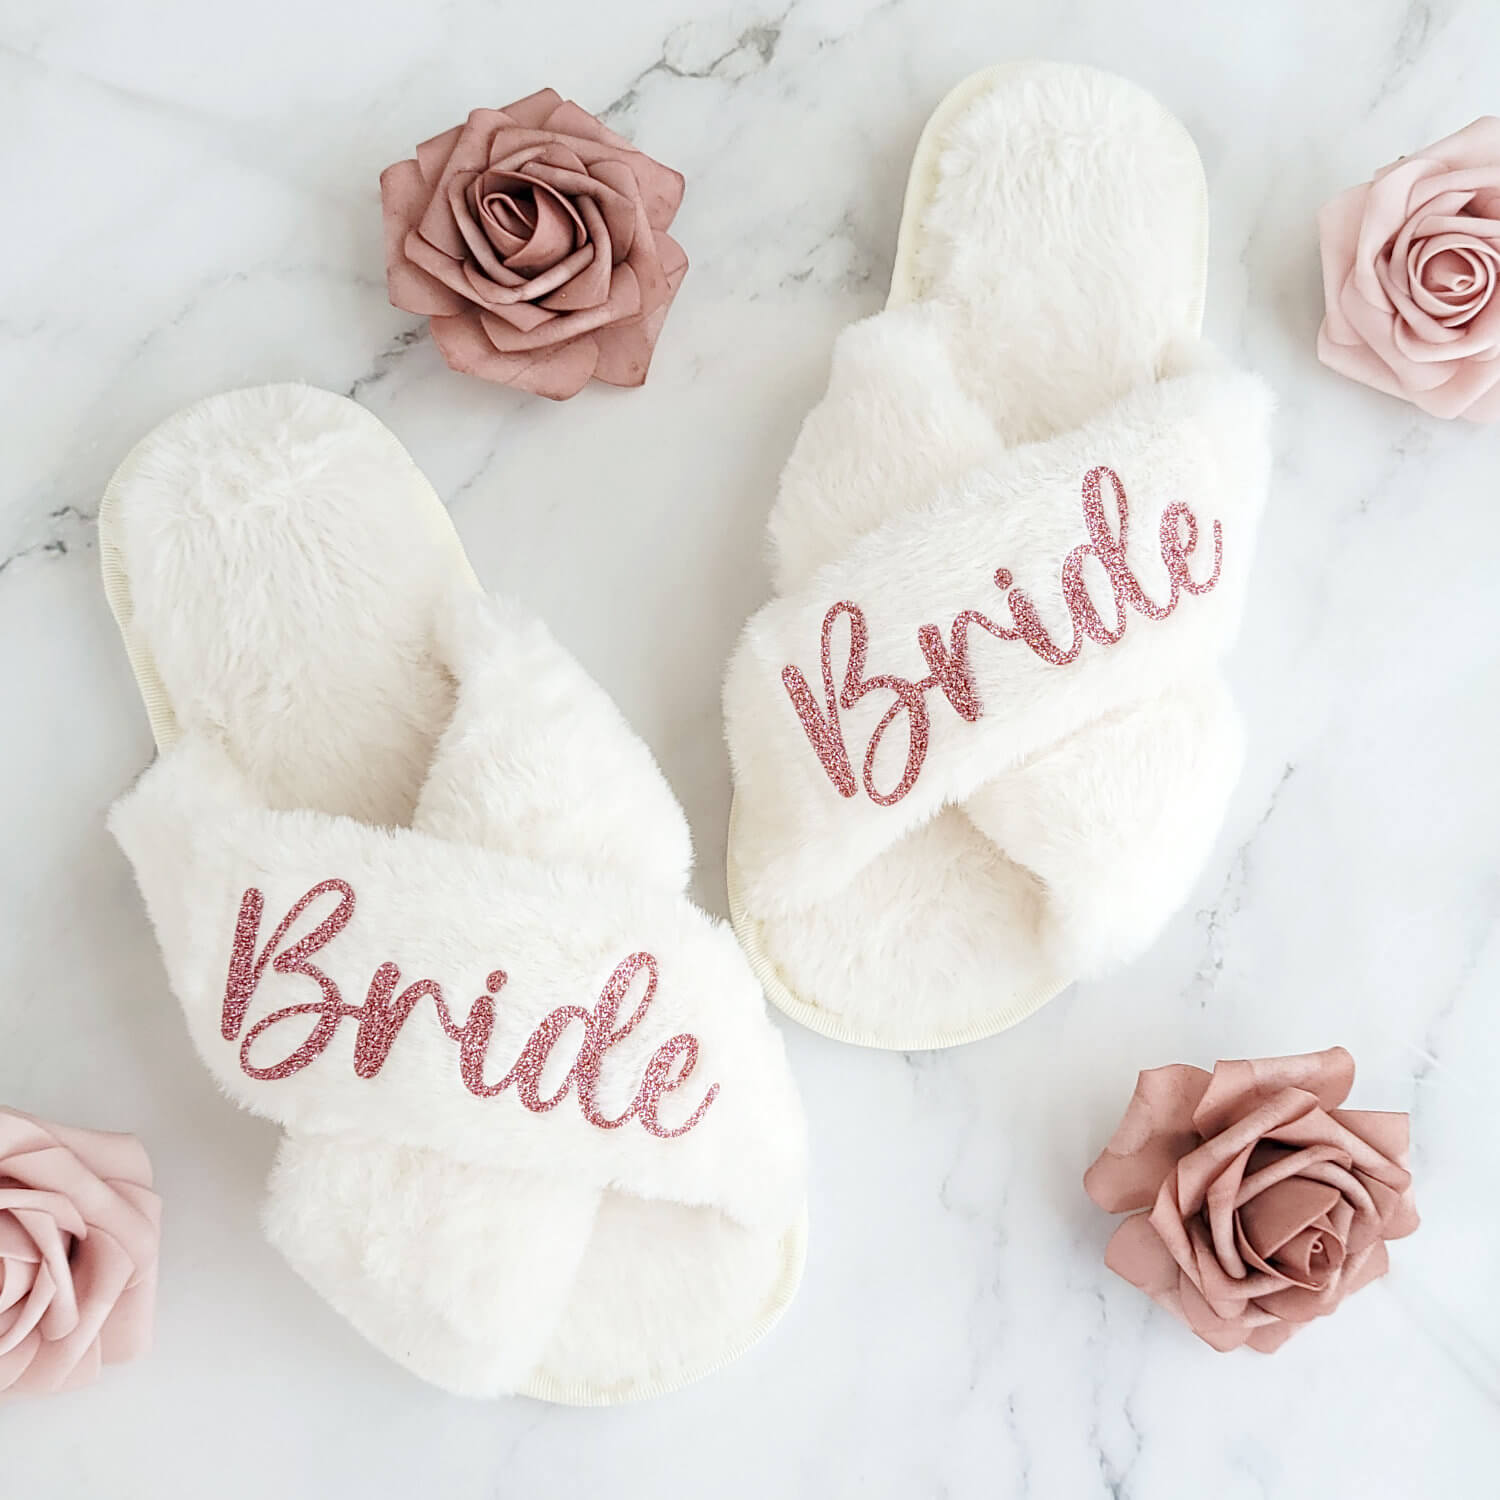 Bride and Bridesmaid Slippers